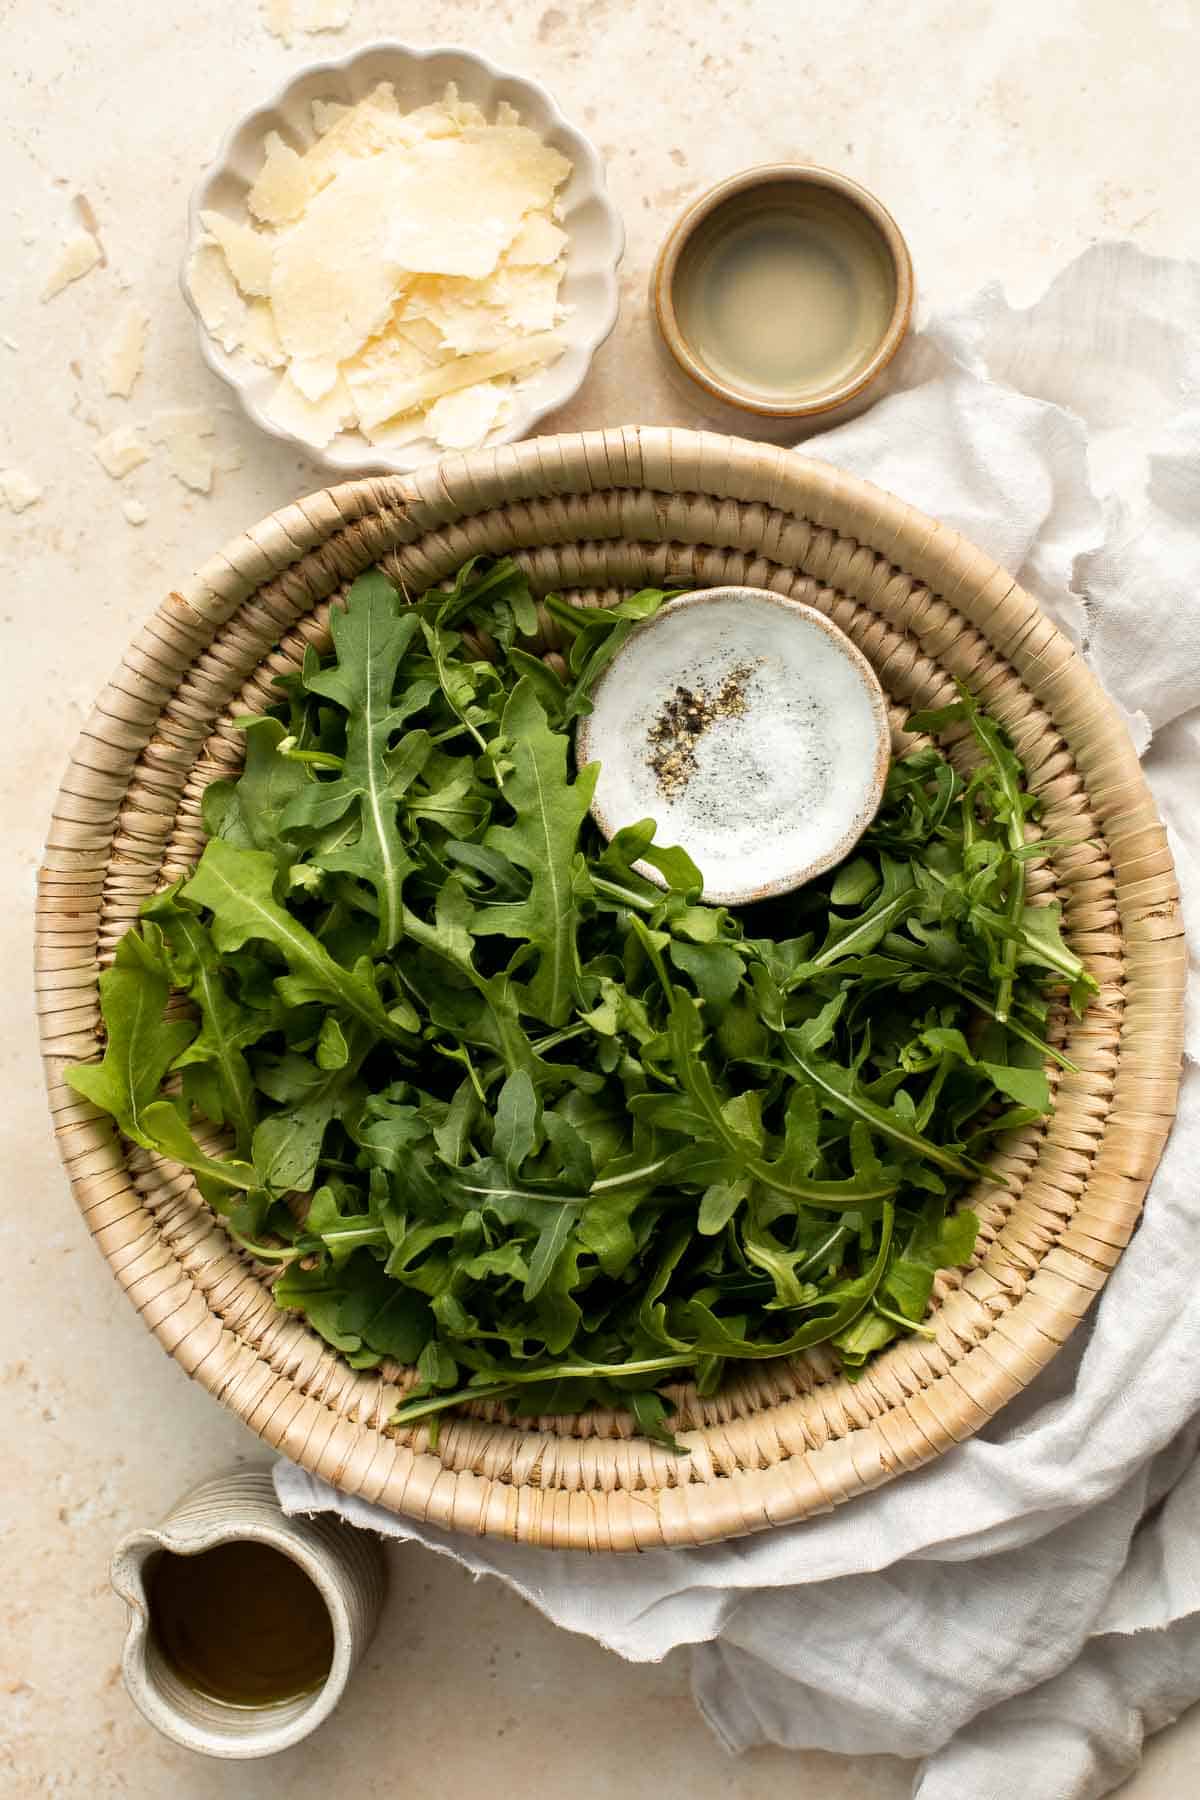 Arugula Salad with Parmesan cheese and a simple homemade lemon dressing is healthy, fresh, and delicious. Toss it together in just 5 minutes! | aheadofthyme.com